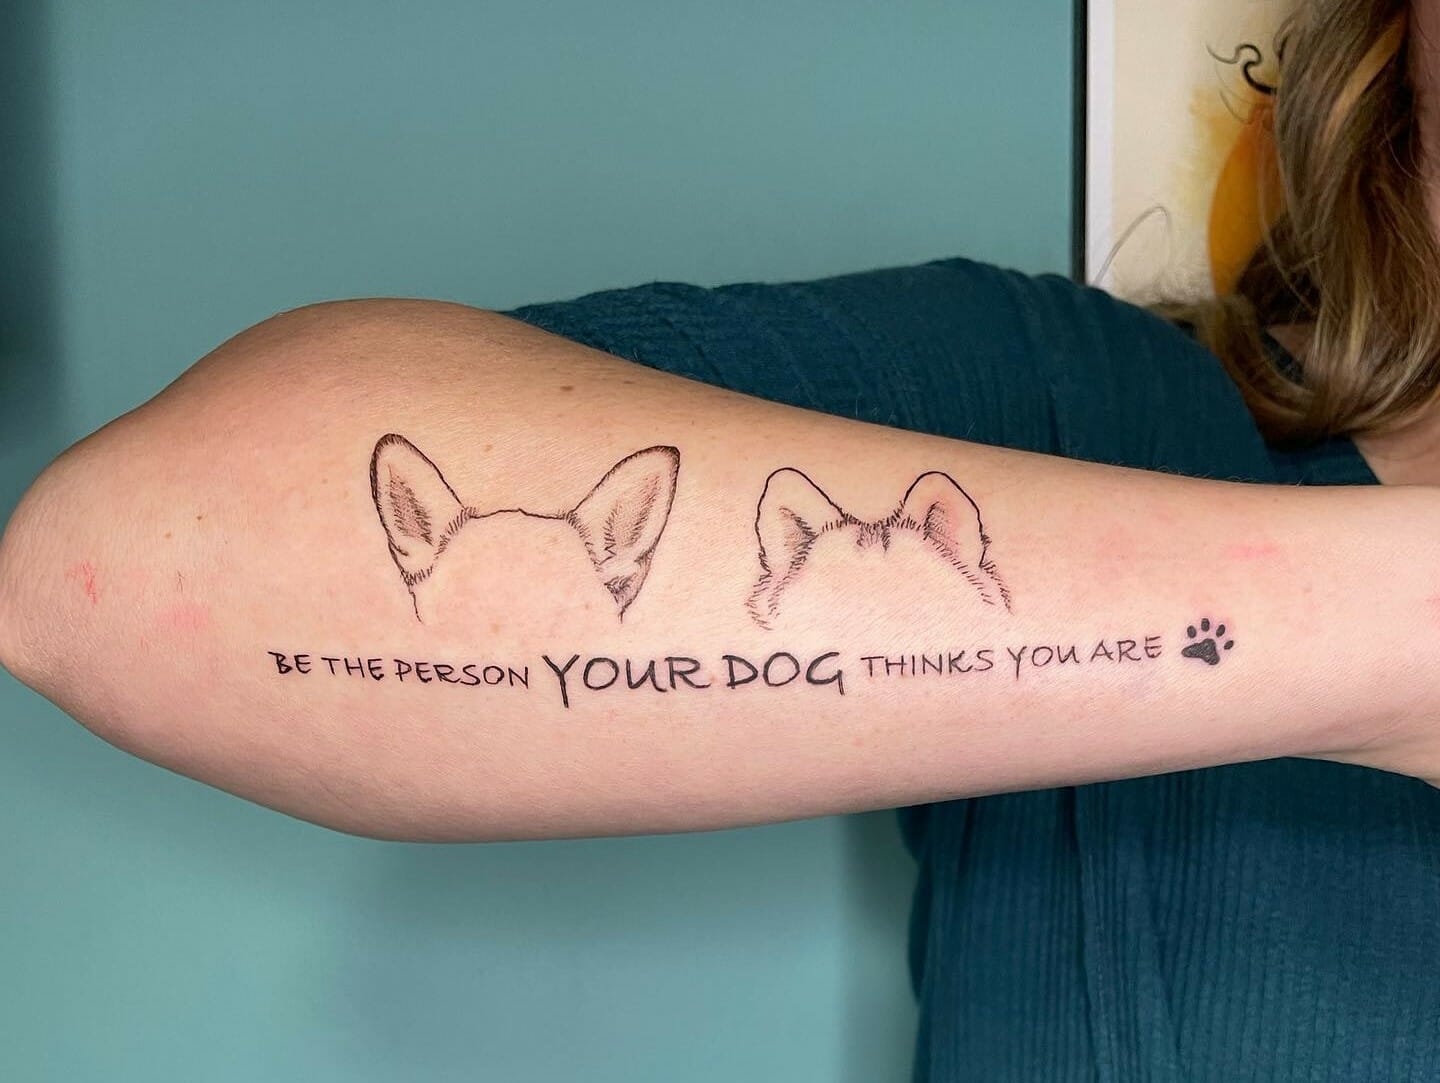 101 Best Dog Ear Tattoo Ideas That Will Blow Your Mind!

+2023